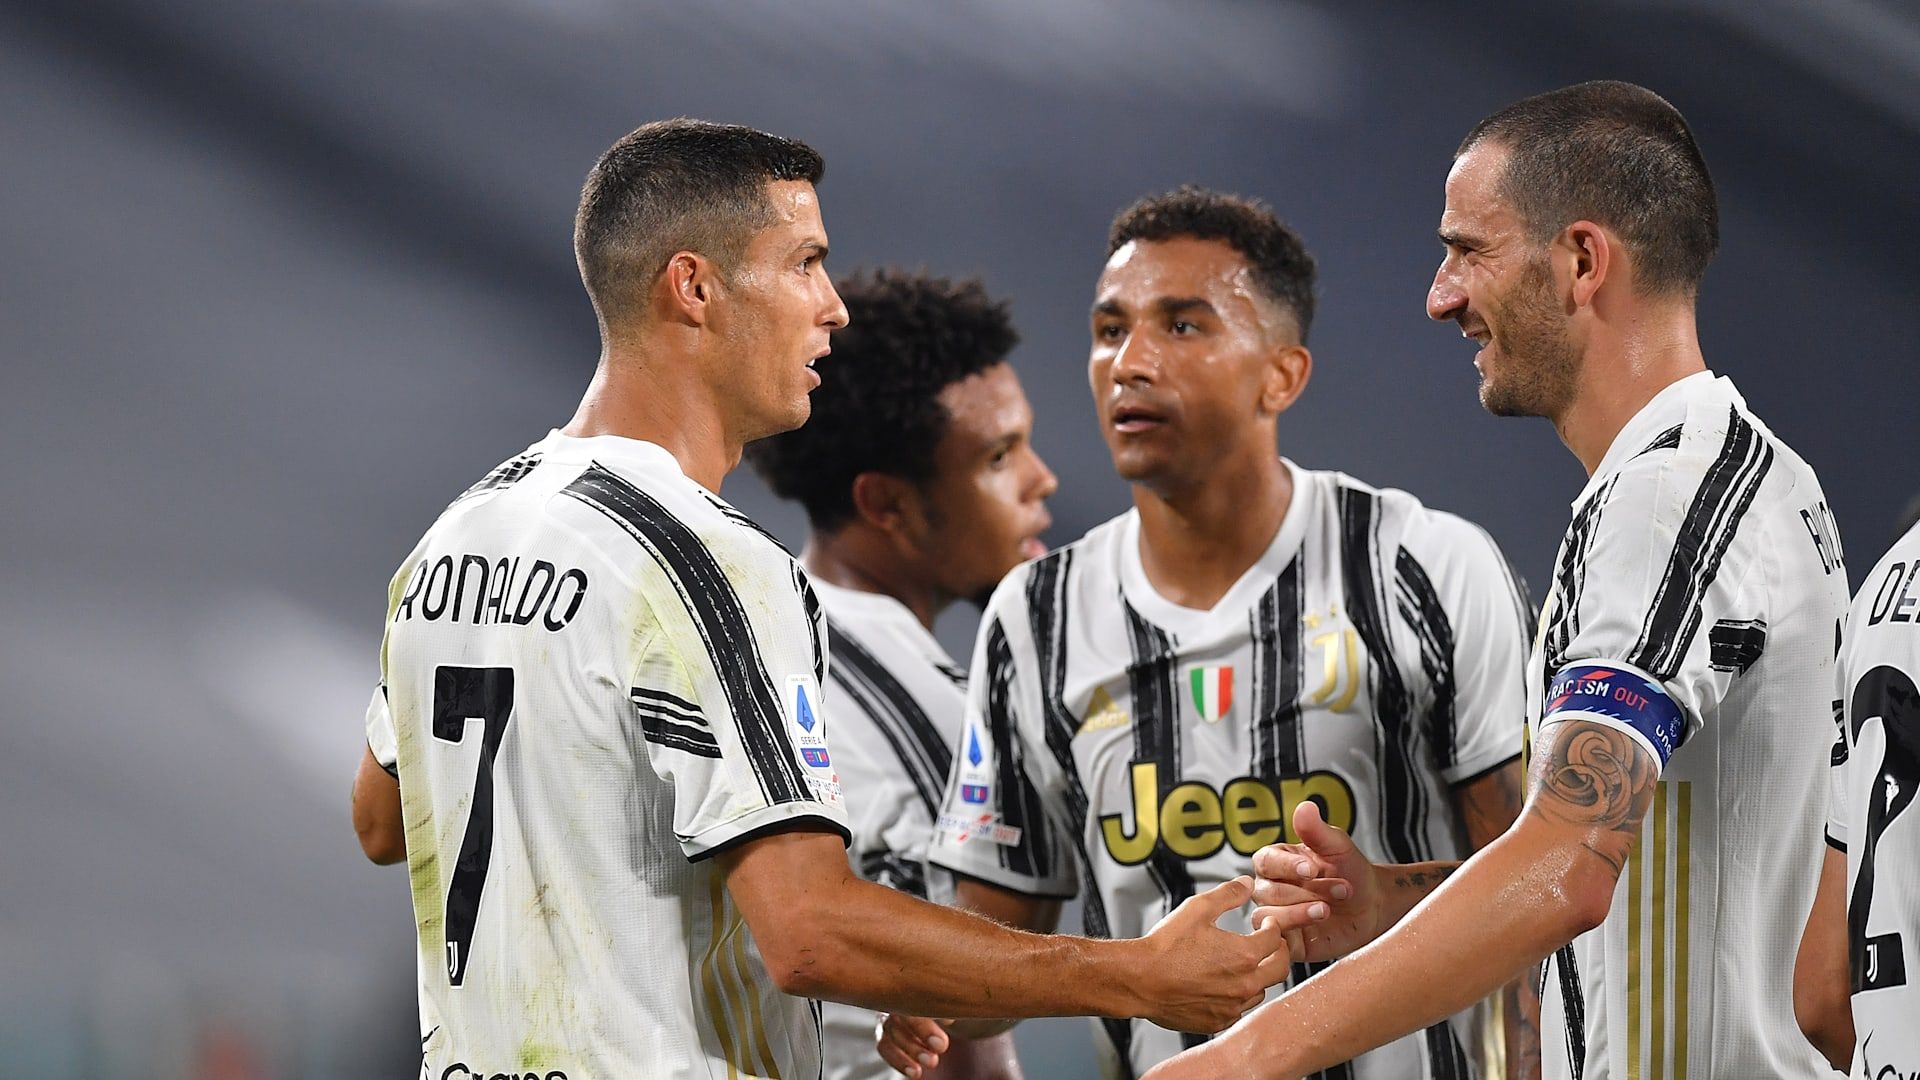 Serie A 2020 21: Juventus Vs Napoli And Matchweek 3 Fixtures, TV Times And Where To Watch Live Streaming In India